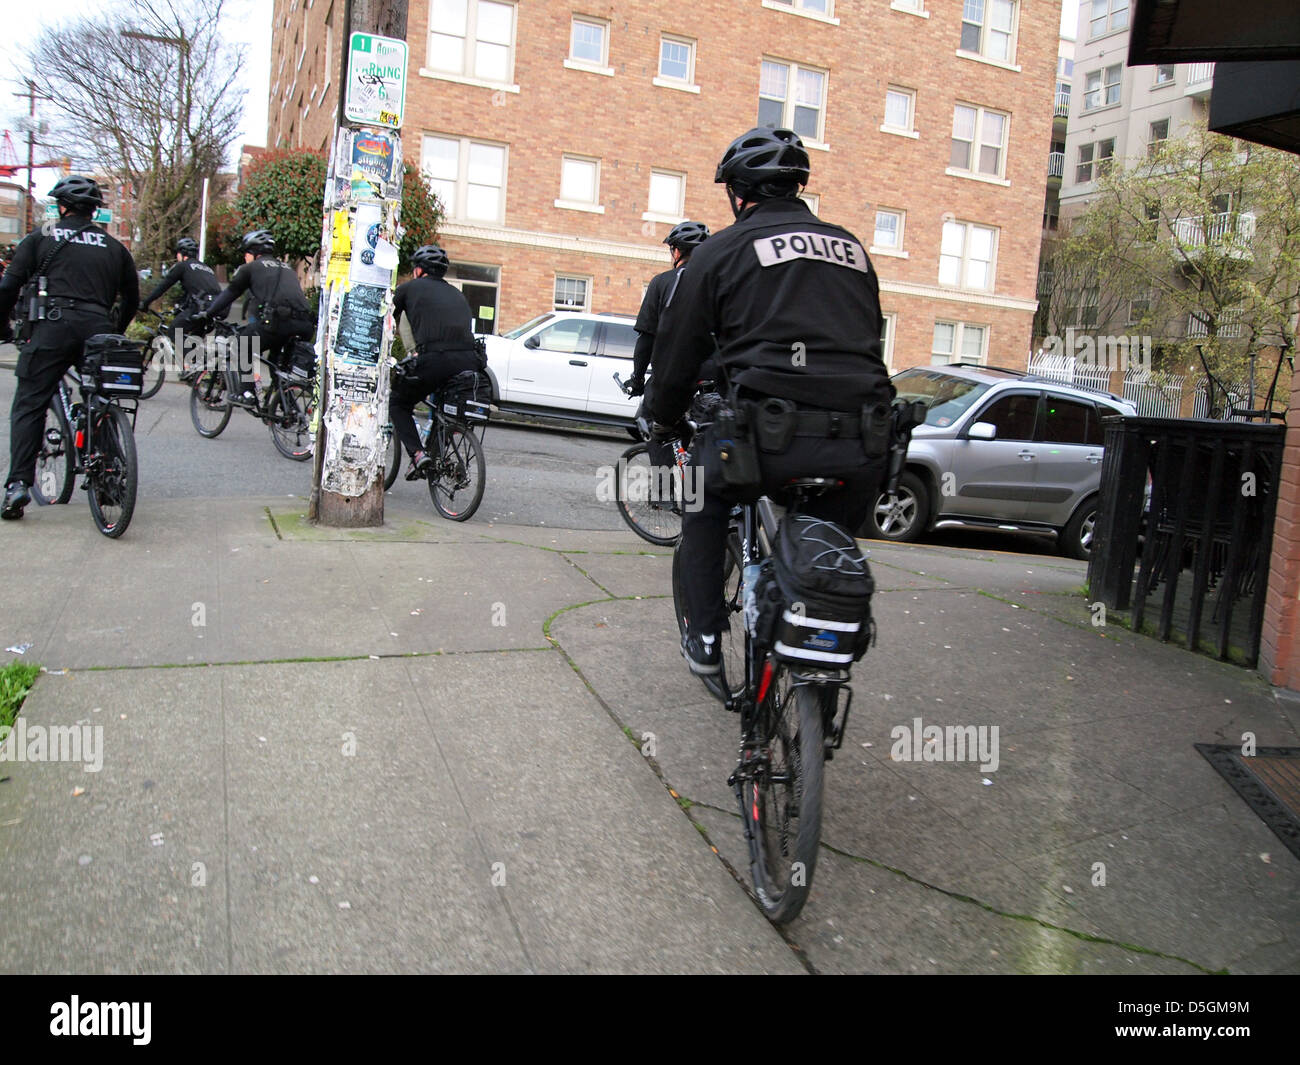 Seattle police cycle cops at an anti-police demo in Seattle Washington, USA Stock Photo